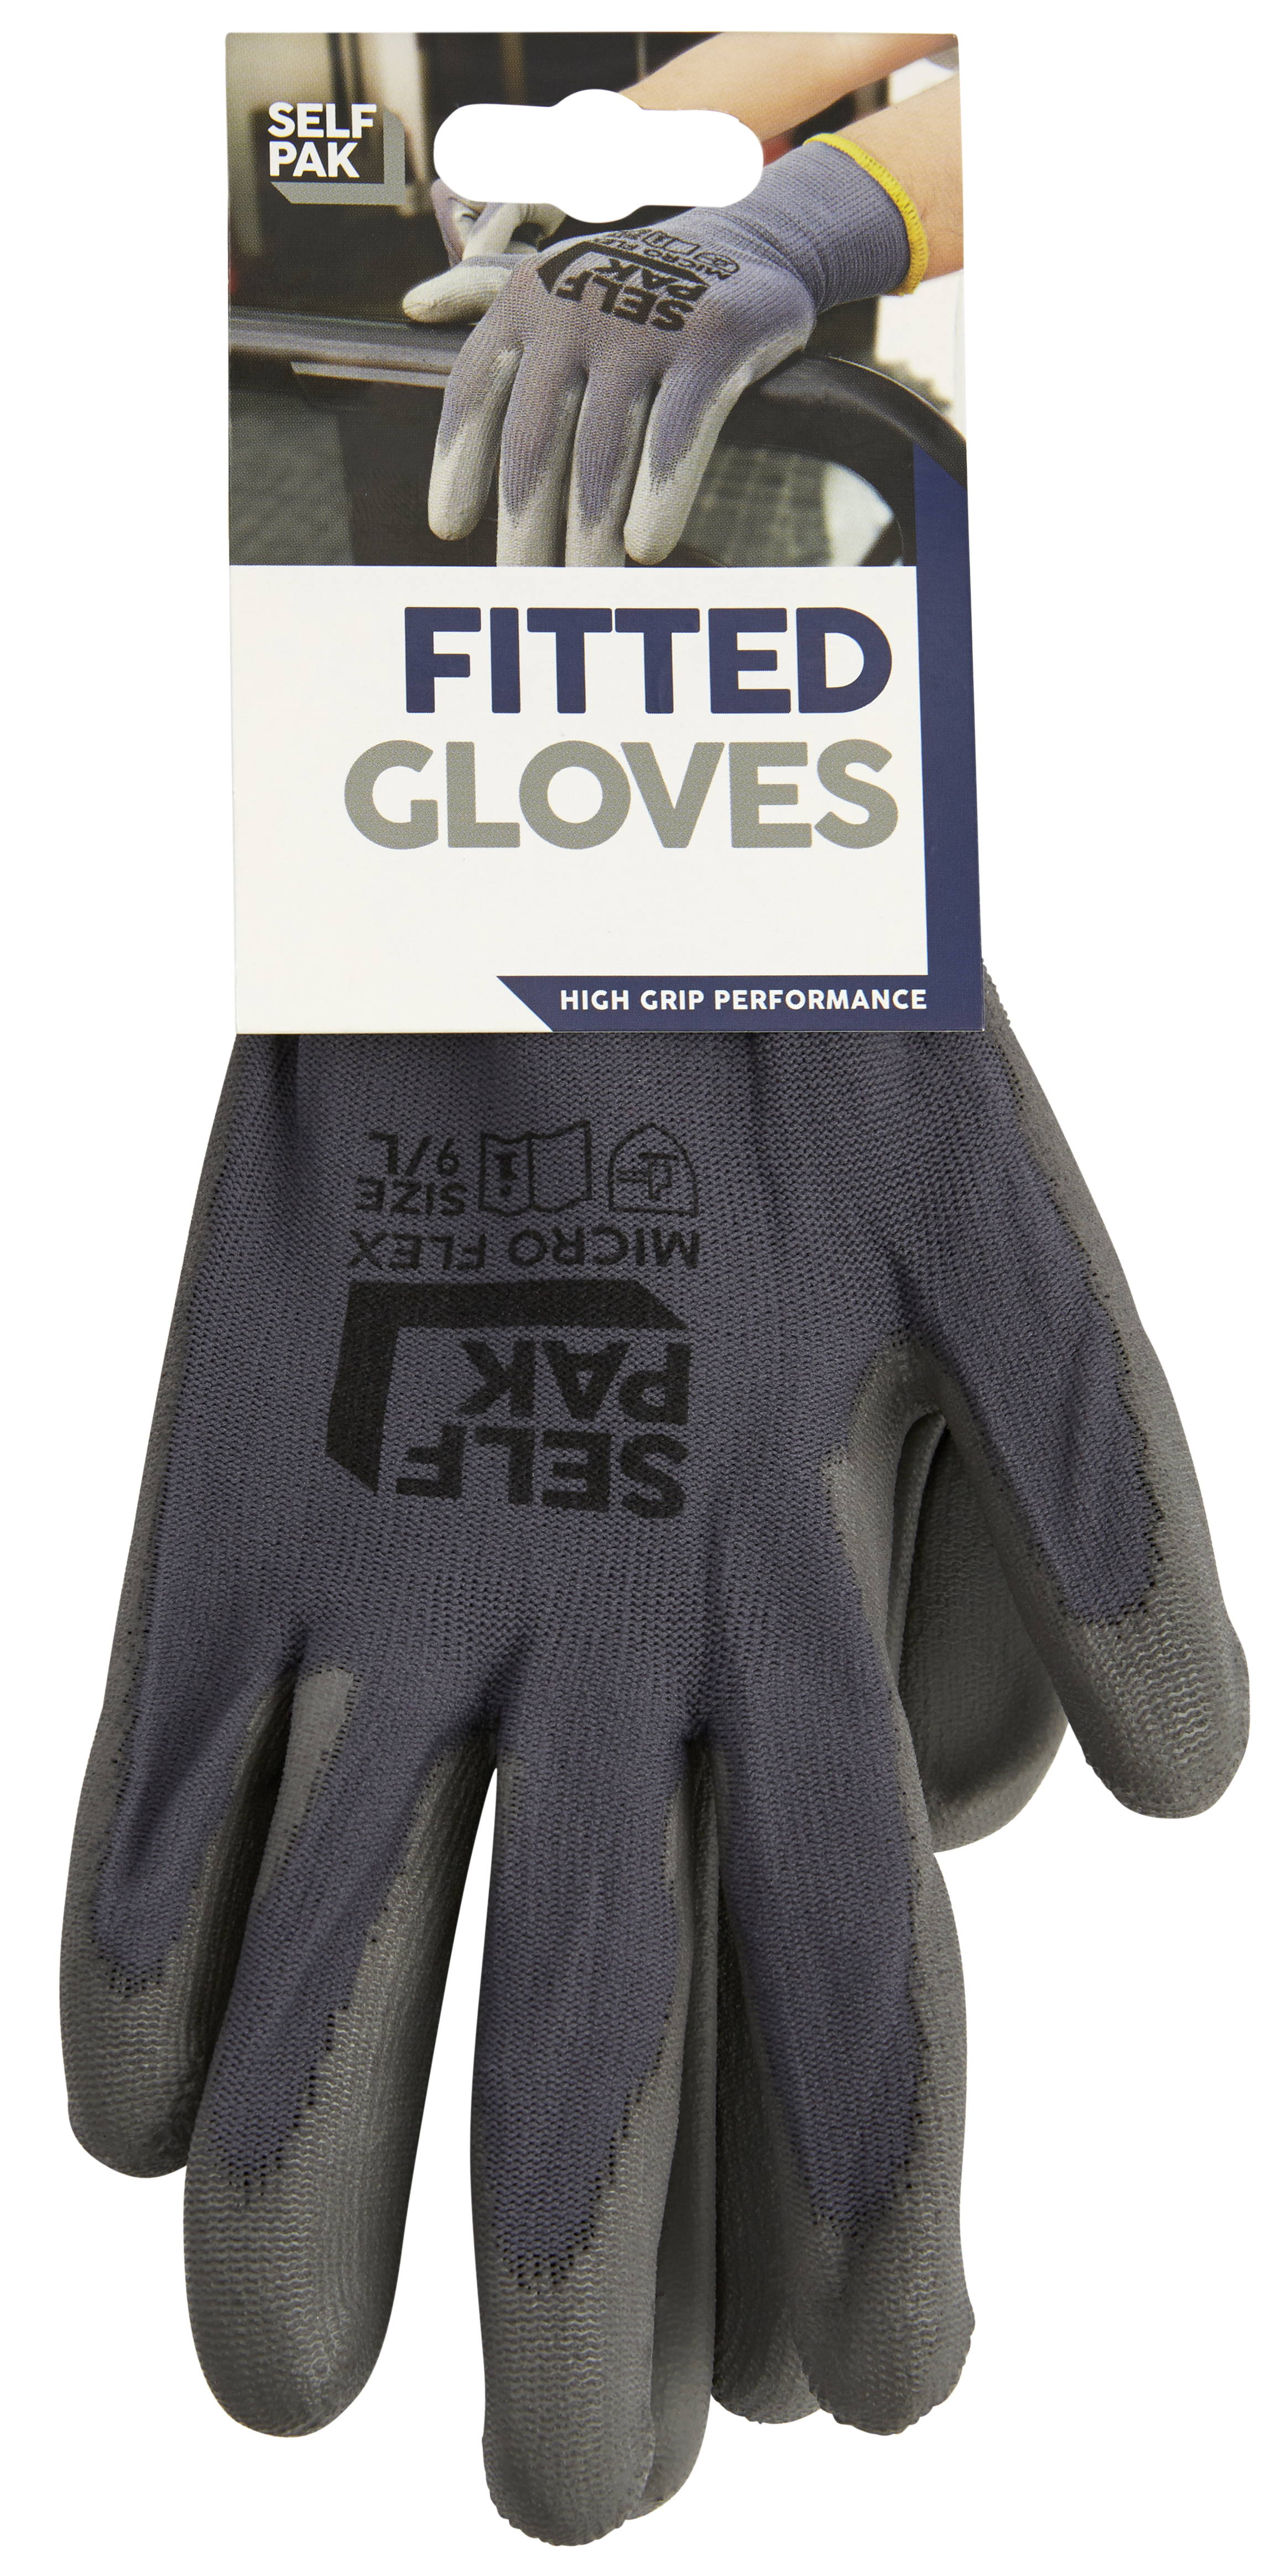 https://www.onlineboxes.co.uk/pictures/moving_gloves_l.jpg